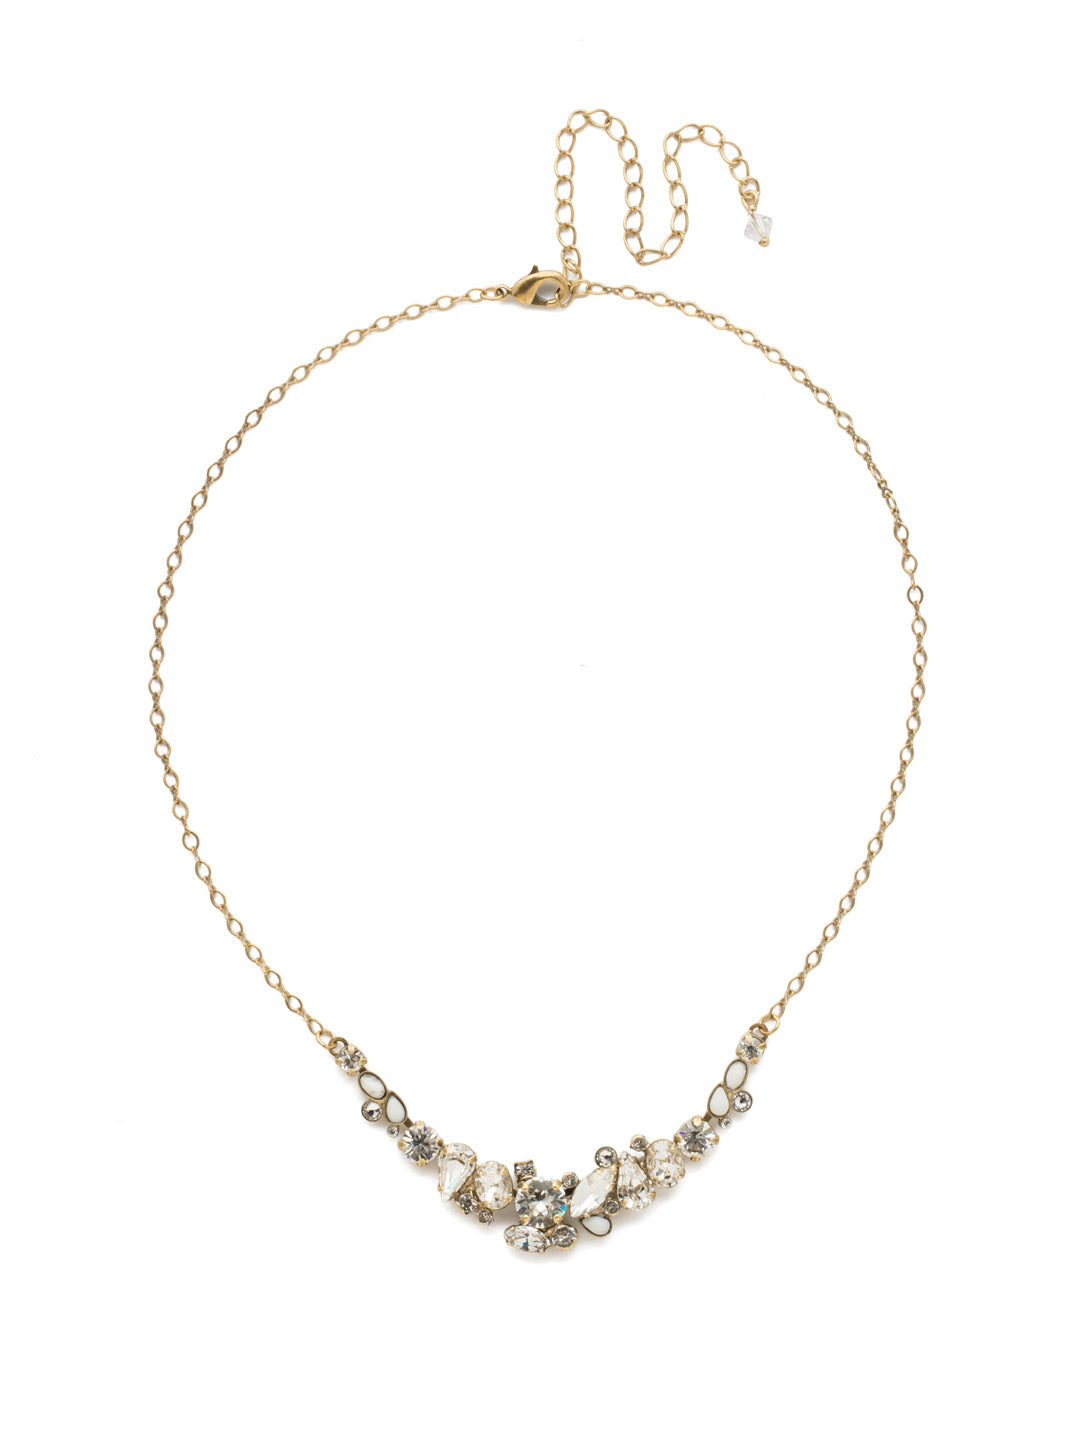 Asymmetric Cluster Necklace - NDK16AGCRY